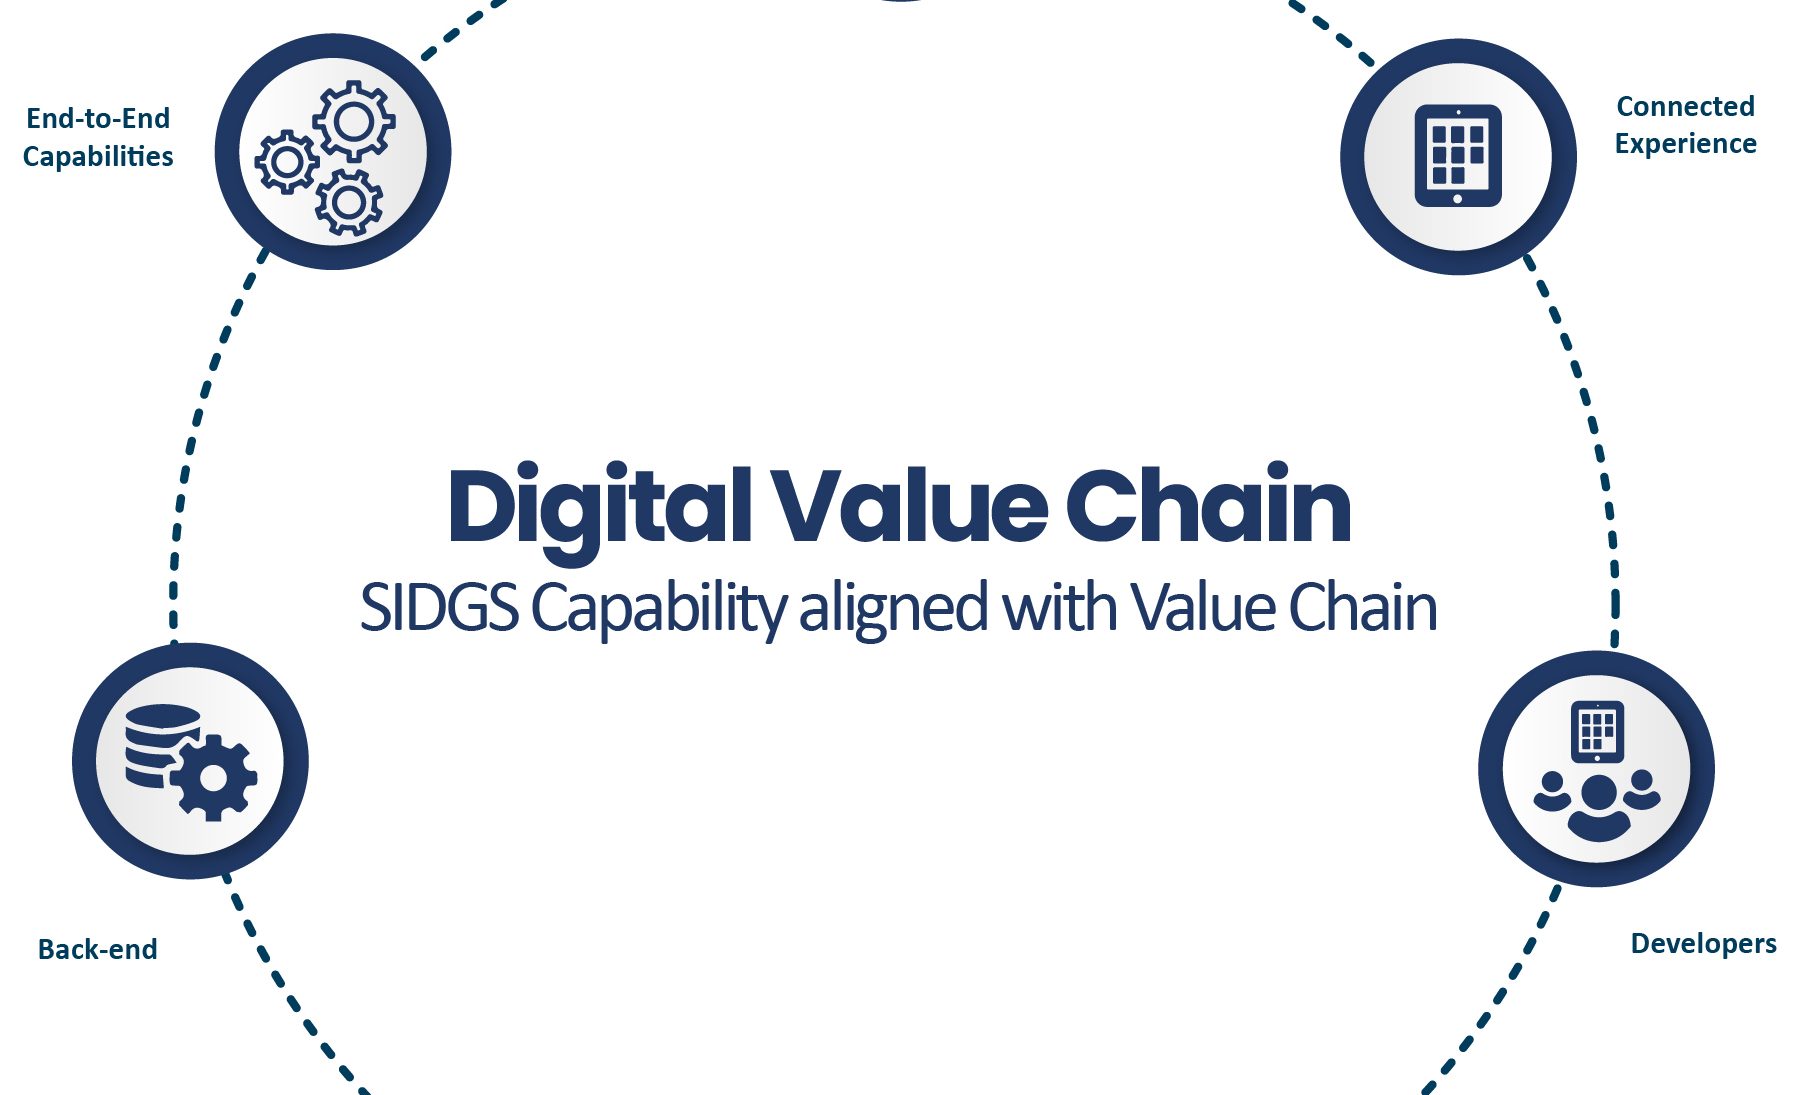 Is your Business Ready for Digital Value Chain Implementation?